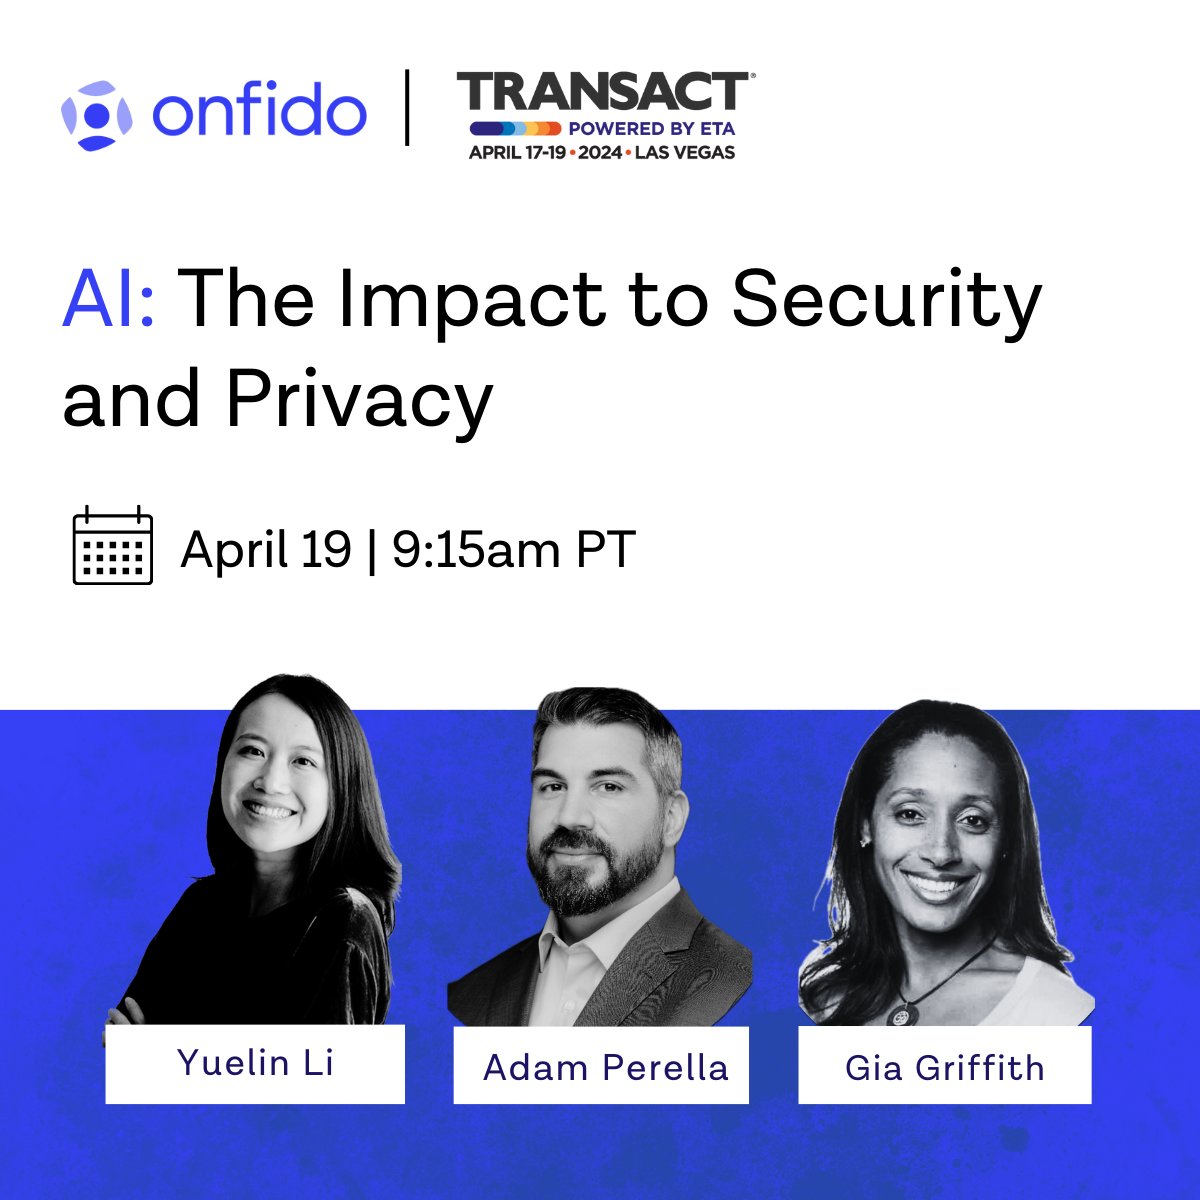 Headed to TRANSACT 2024 Las Vegas? Join Yuelin Li's insightful session on AI's impact on security and privacy: bit.ly/3UaL44y #Transact #AI